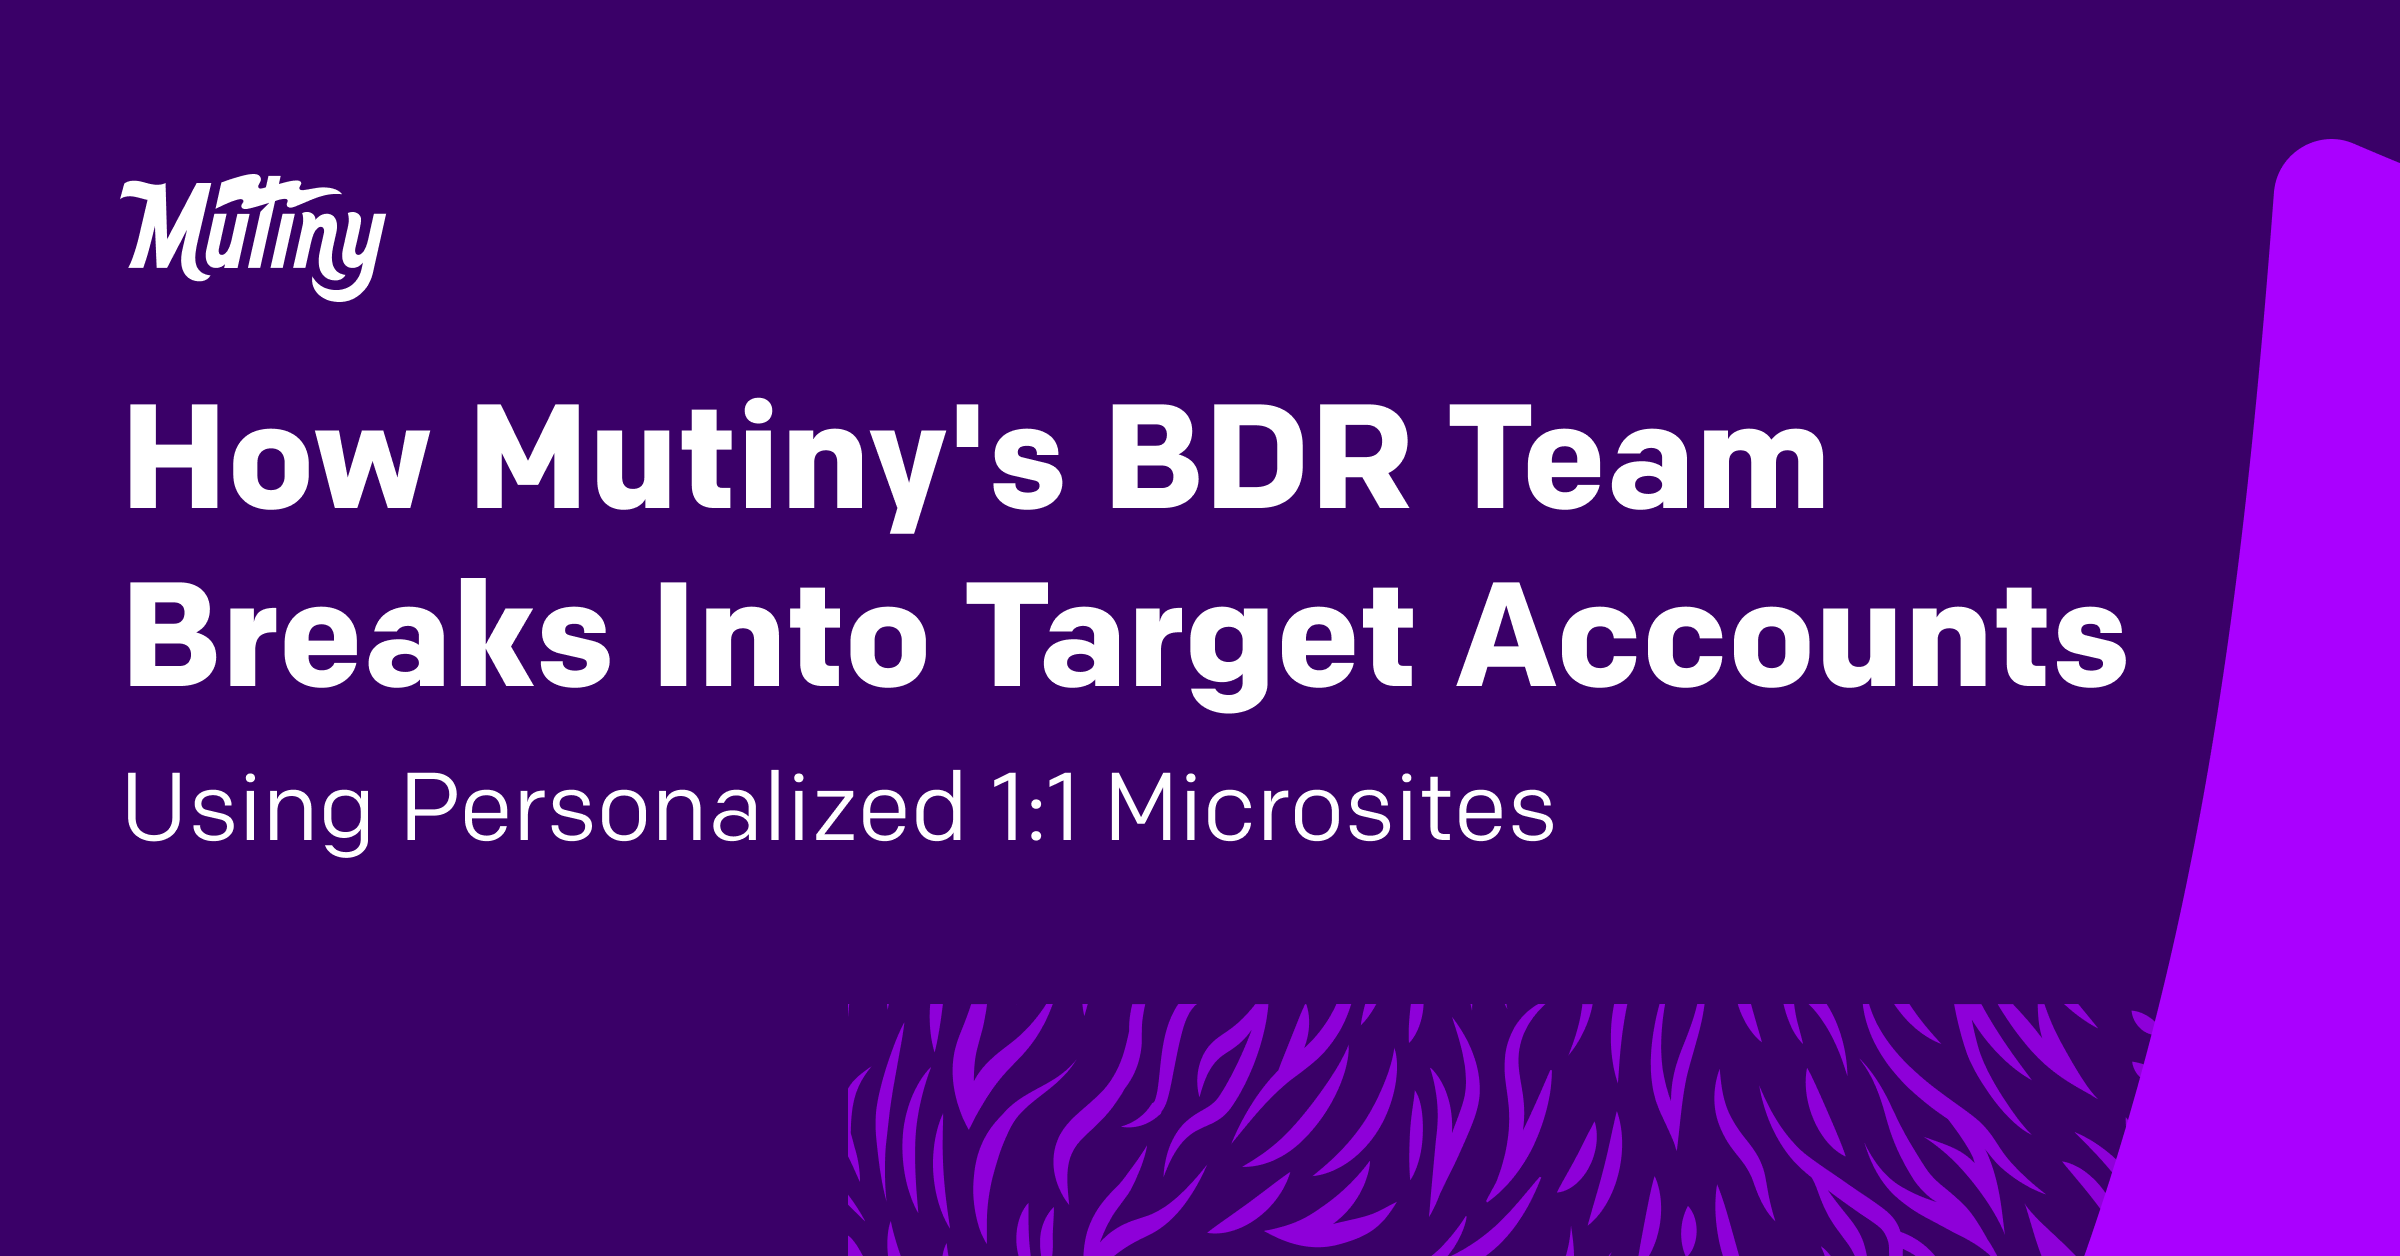 How Mutiny's BDR Team Breaks Into Target Accounts With Personalized Microsites